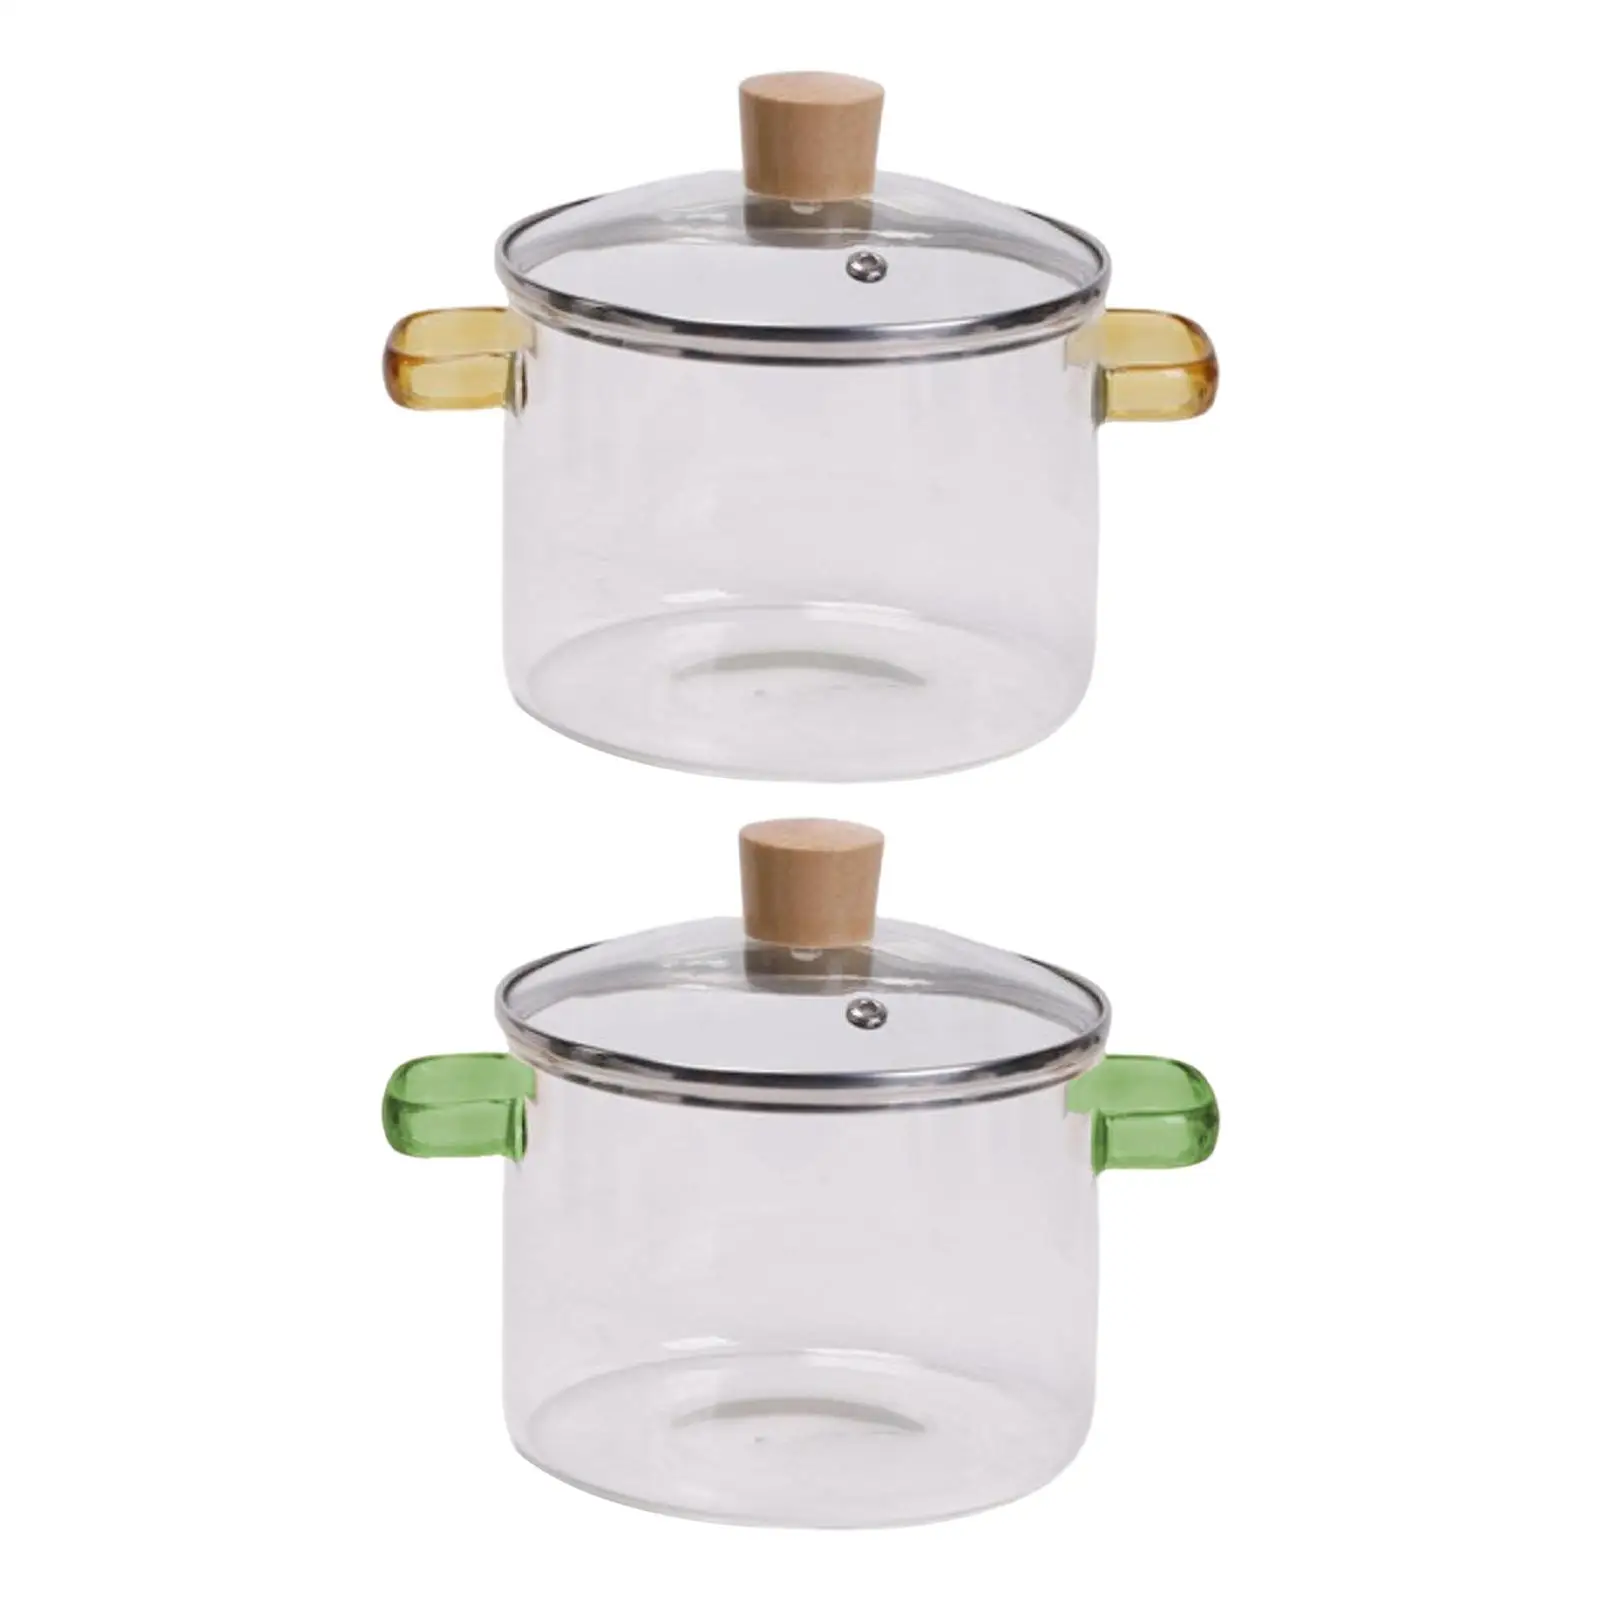 https://ae01.alicdn.com/kf/S403ff2e443084ffab3e3a19729e7f586M/Glass-Soup-Bowl-Transparent-Cooking-Cereal-Bowl-Glass-Saucepan-with-Cover-Mixing-Glass-Pot-for-Tea.jpg